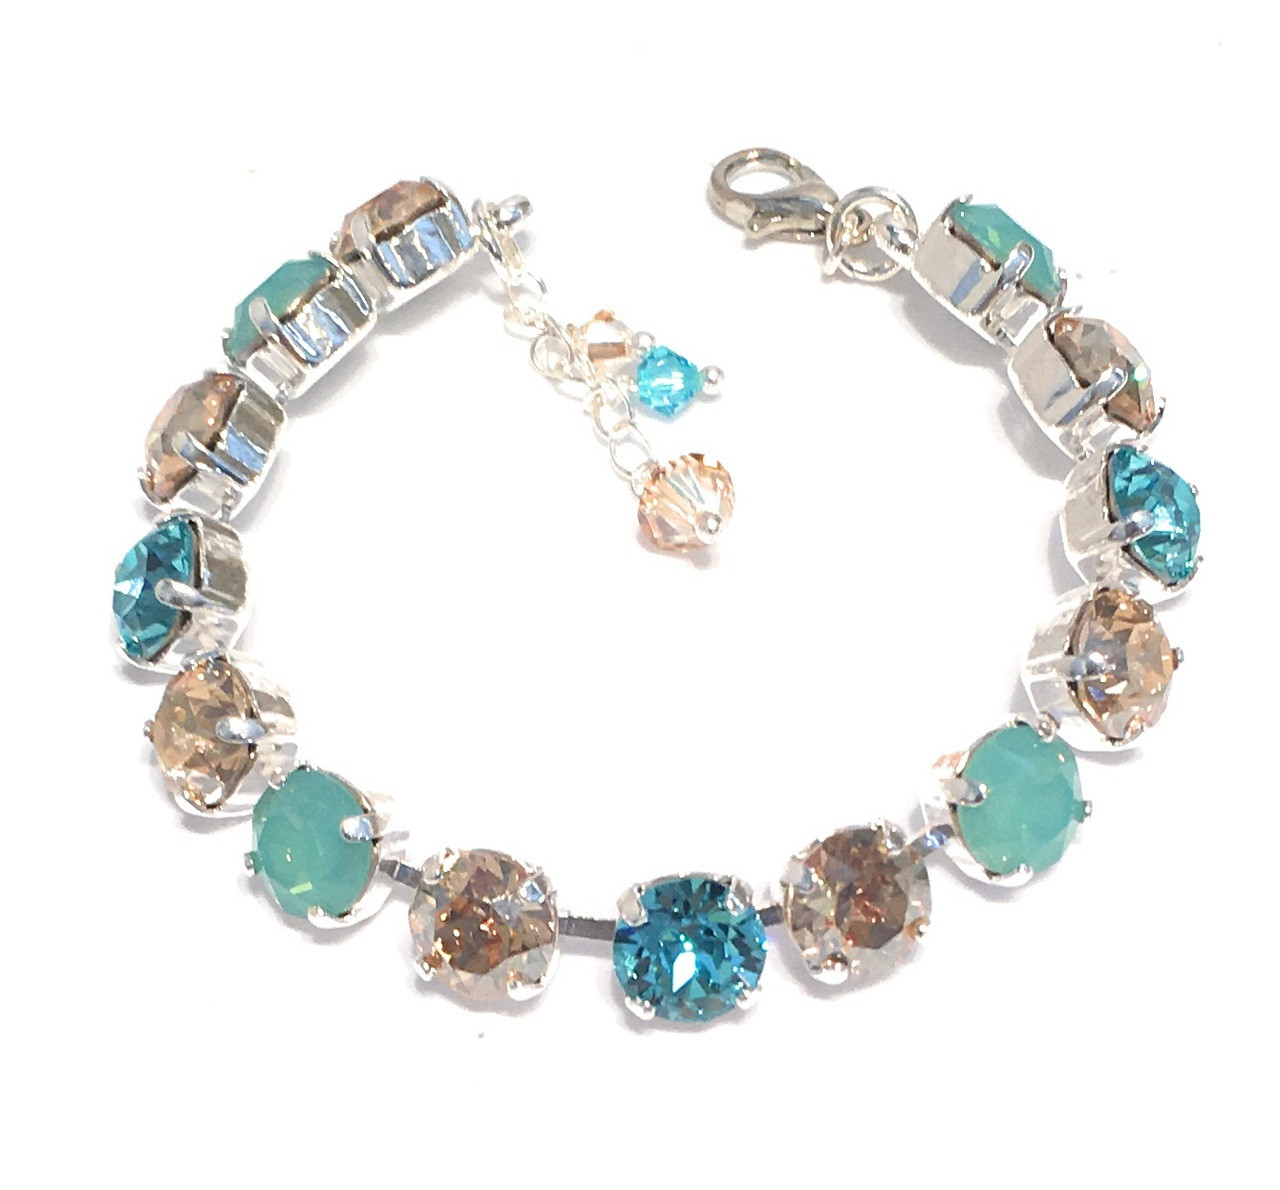 Pacific Opal Chaton and Golden Shadow Bracelet with Crystals from ...